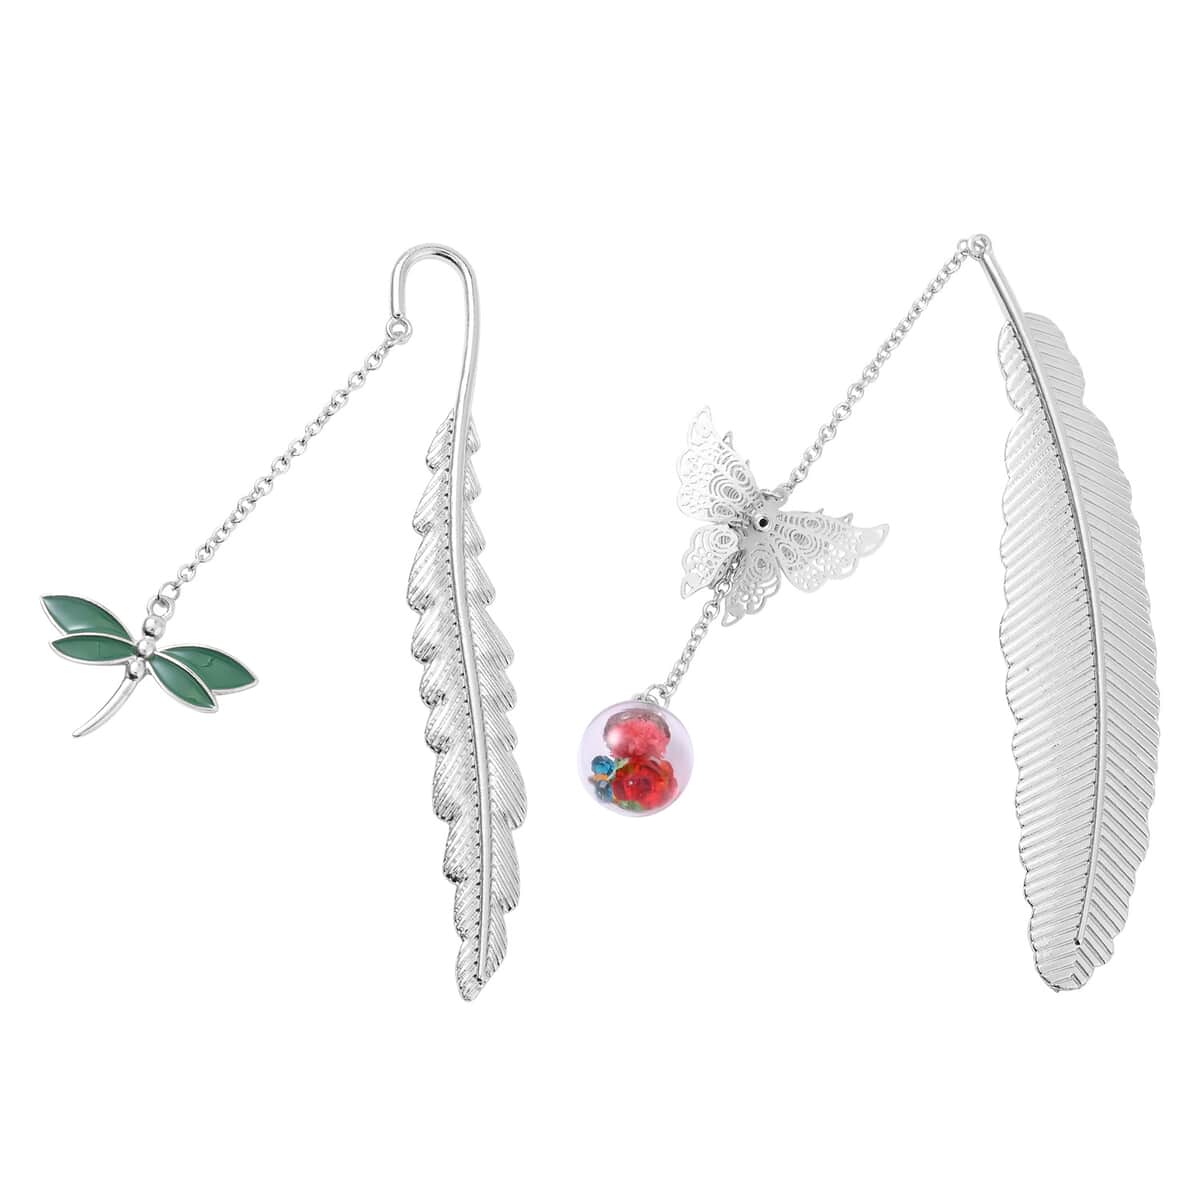 Set of 2 Multi Austrian Crystal and Enameled Metallic Feather Bookmarks in Silvertone with Dragonfly Charm, Butterfly and Dried Pressed Flower image number 0